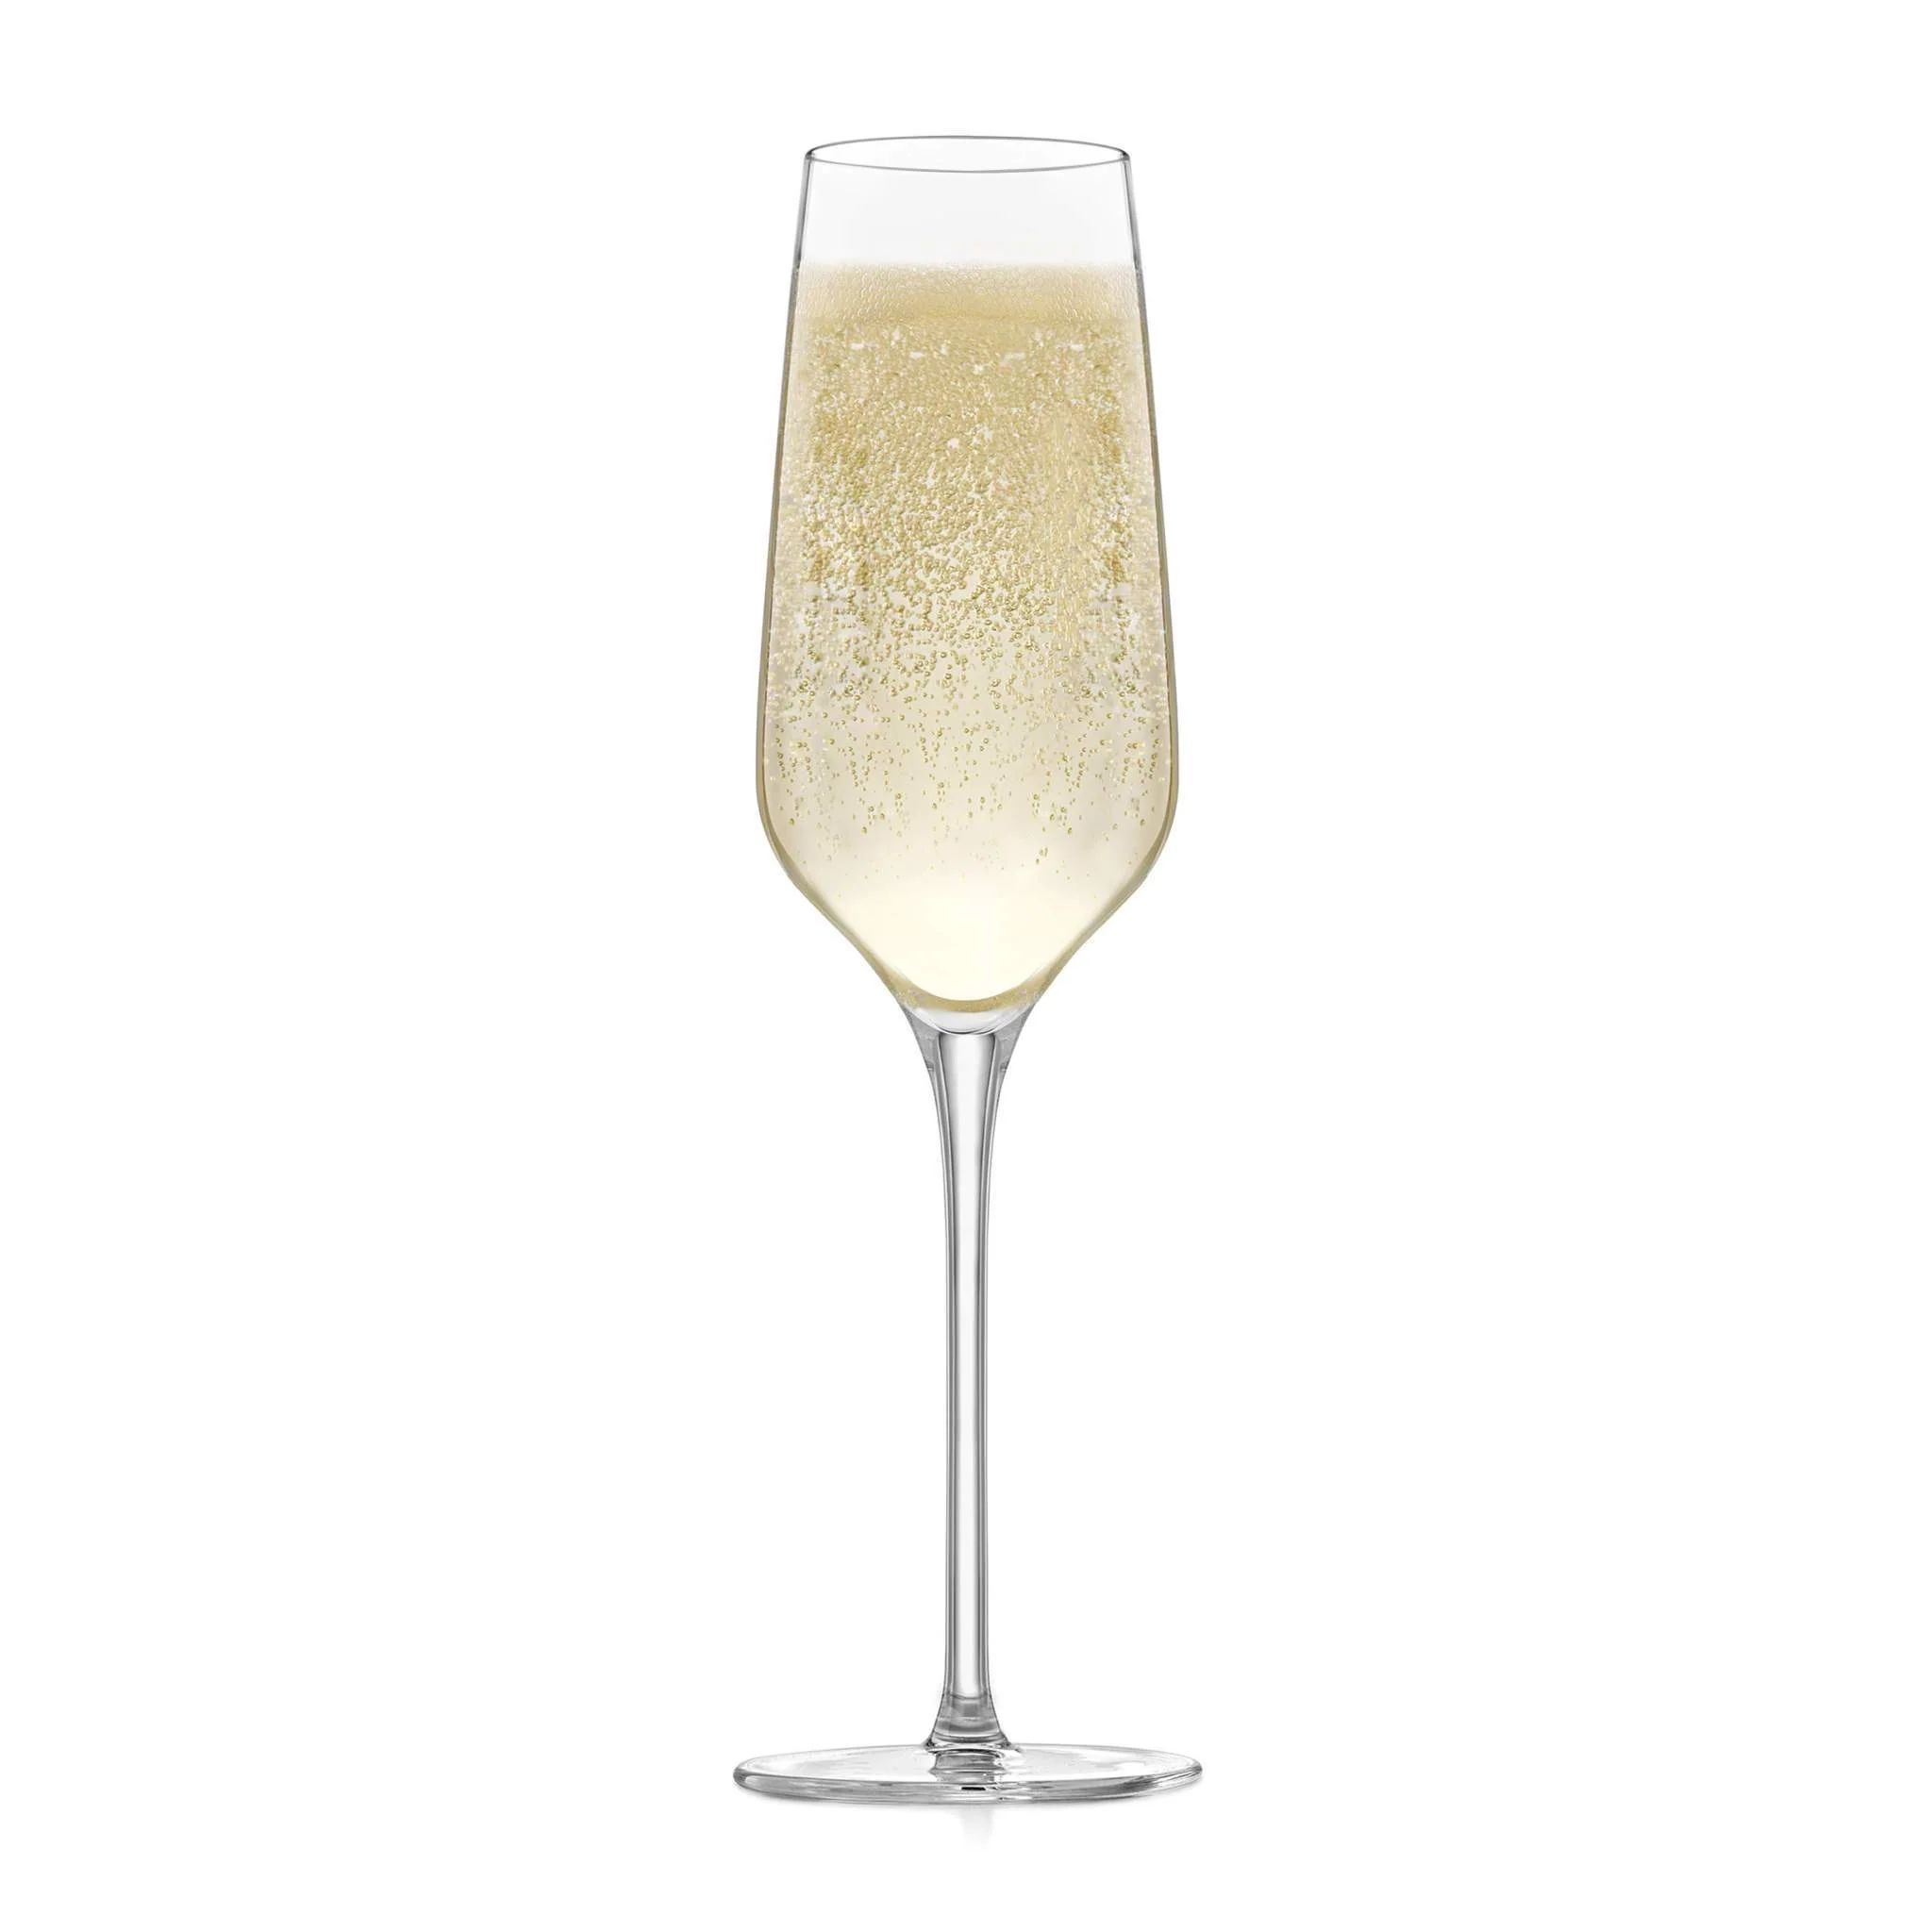 Libbey Signature Greenwich Champagne Flute Glasses, 8.25-ounce, Set of 4 | Libbey Glass